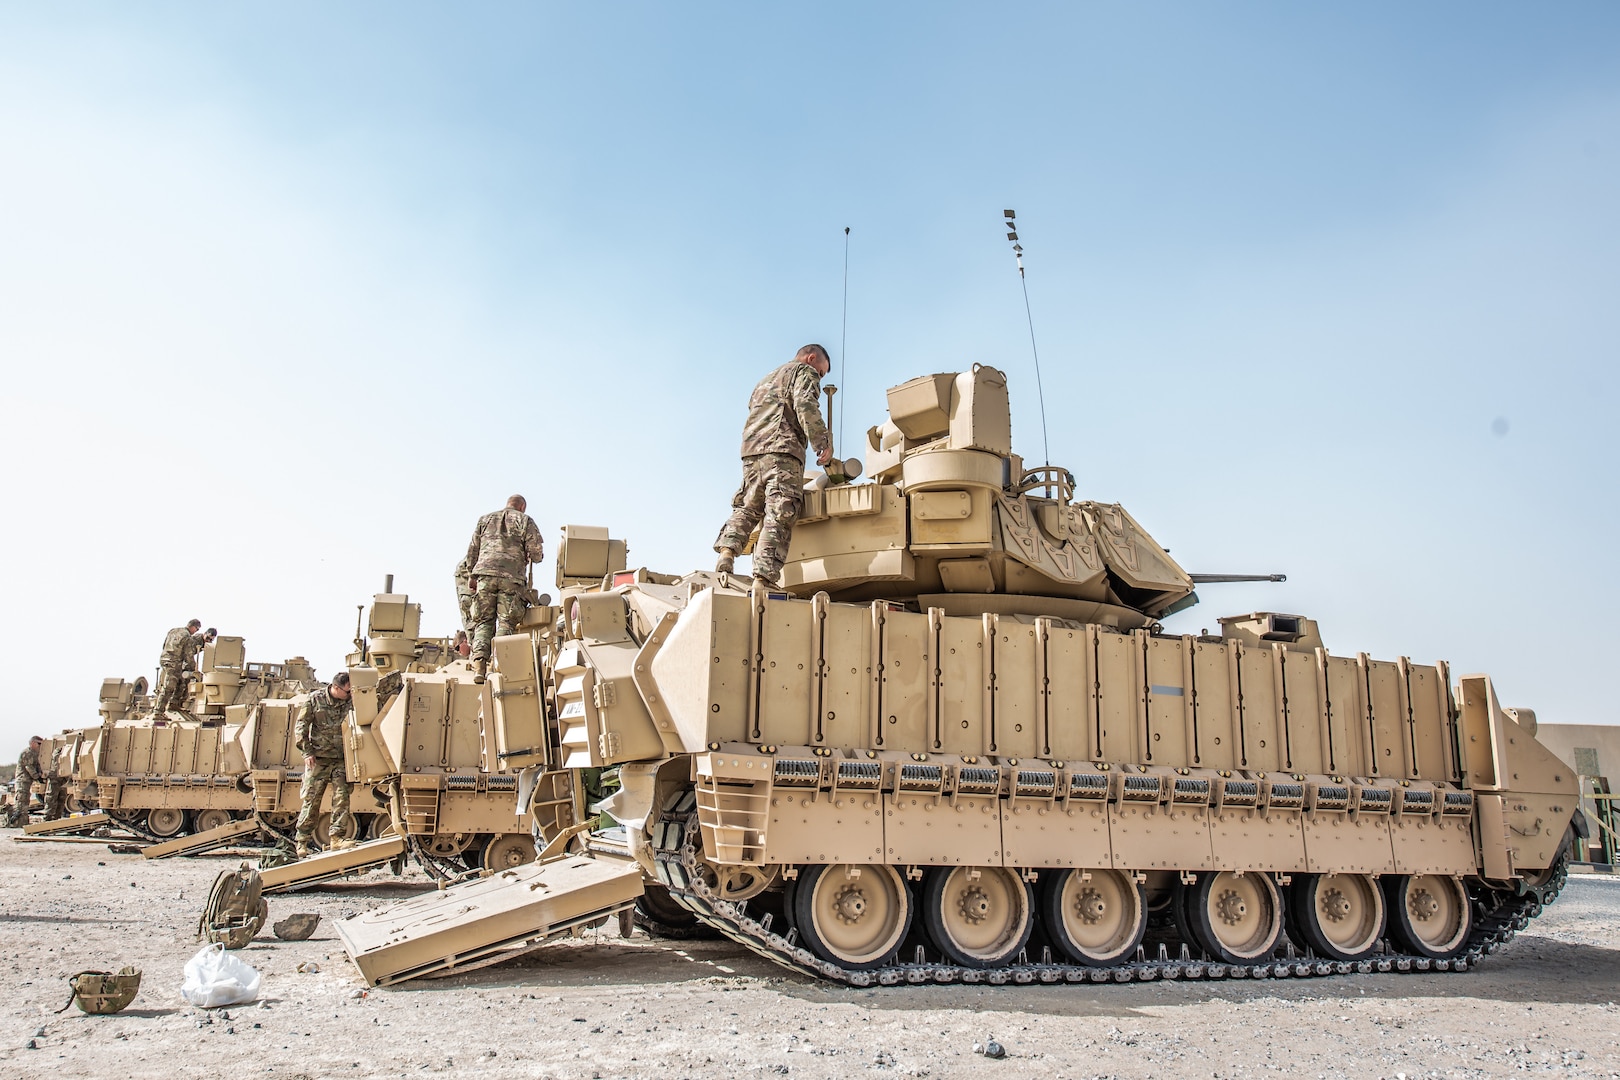 U.S. Soldiers from the 2nd Platoon, Alpha Company, 1/163rd Combined Arms Battalion, inspect Bradley M2A3 Fighting Vehicles at Ali Al Salem AB, Jan. 27, 2022. The vehicle is a light armored, fully tracked transport vehicle, providing cross-country mobility with mounted firepower and protection from artillery and small-arms fire. (U.S. Air National Guard photo by Staff Sgt. Chloe Ochs)